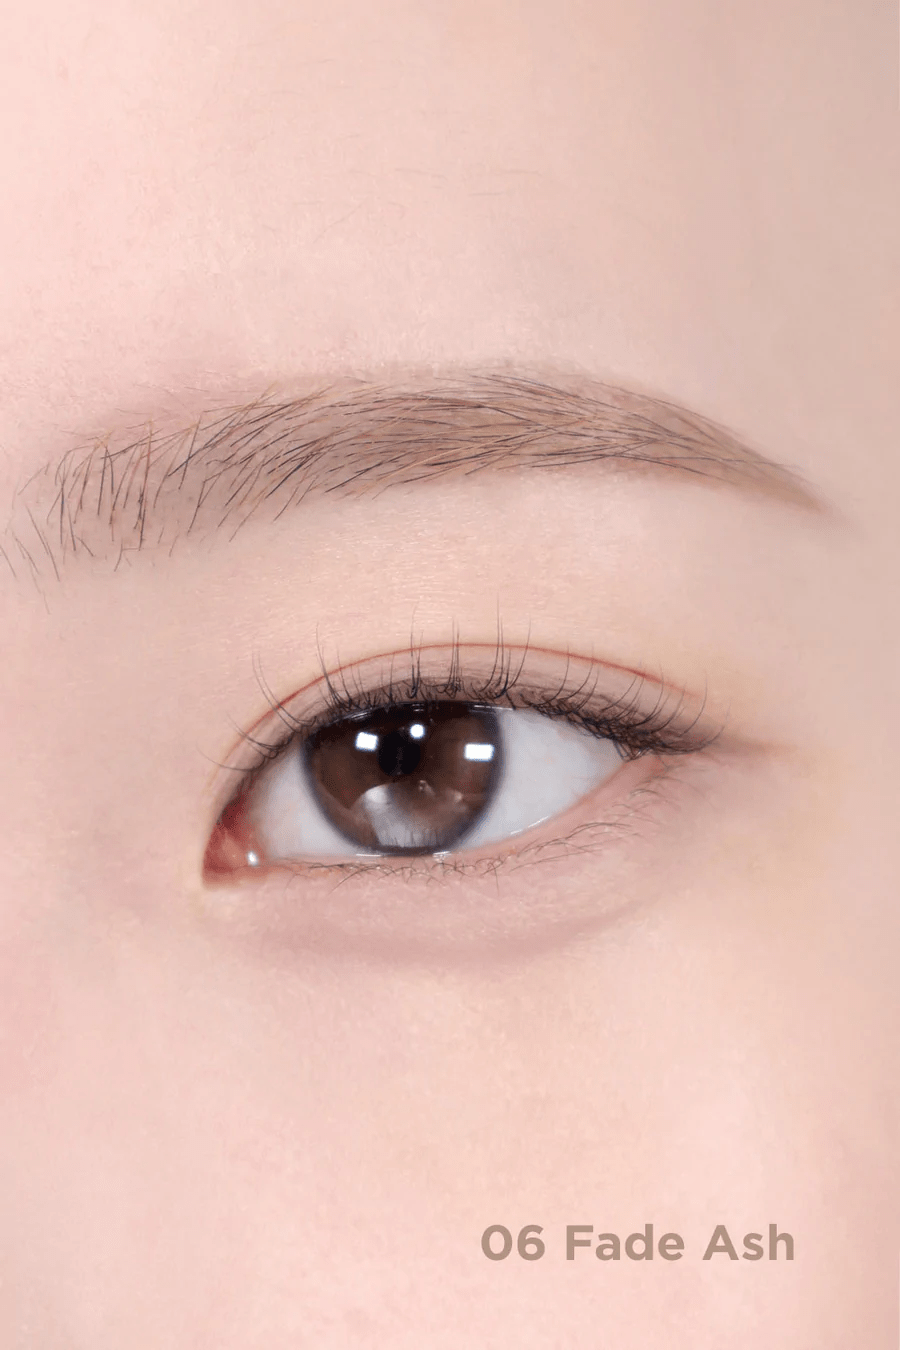 skincare-kbeauty-glowtime-rom&nd han all shade liner06 fade ash